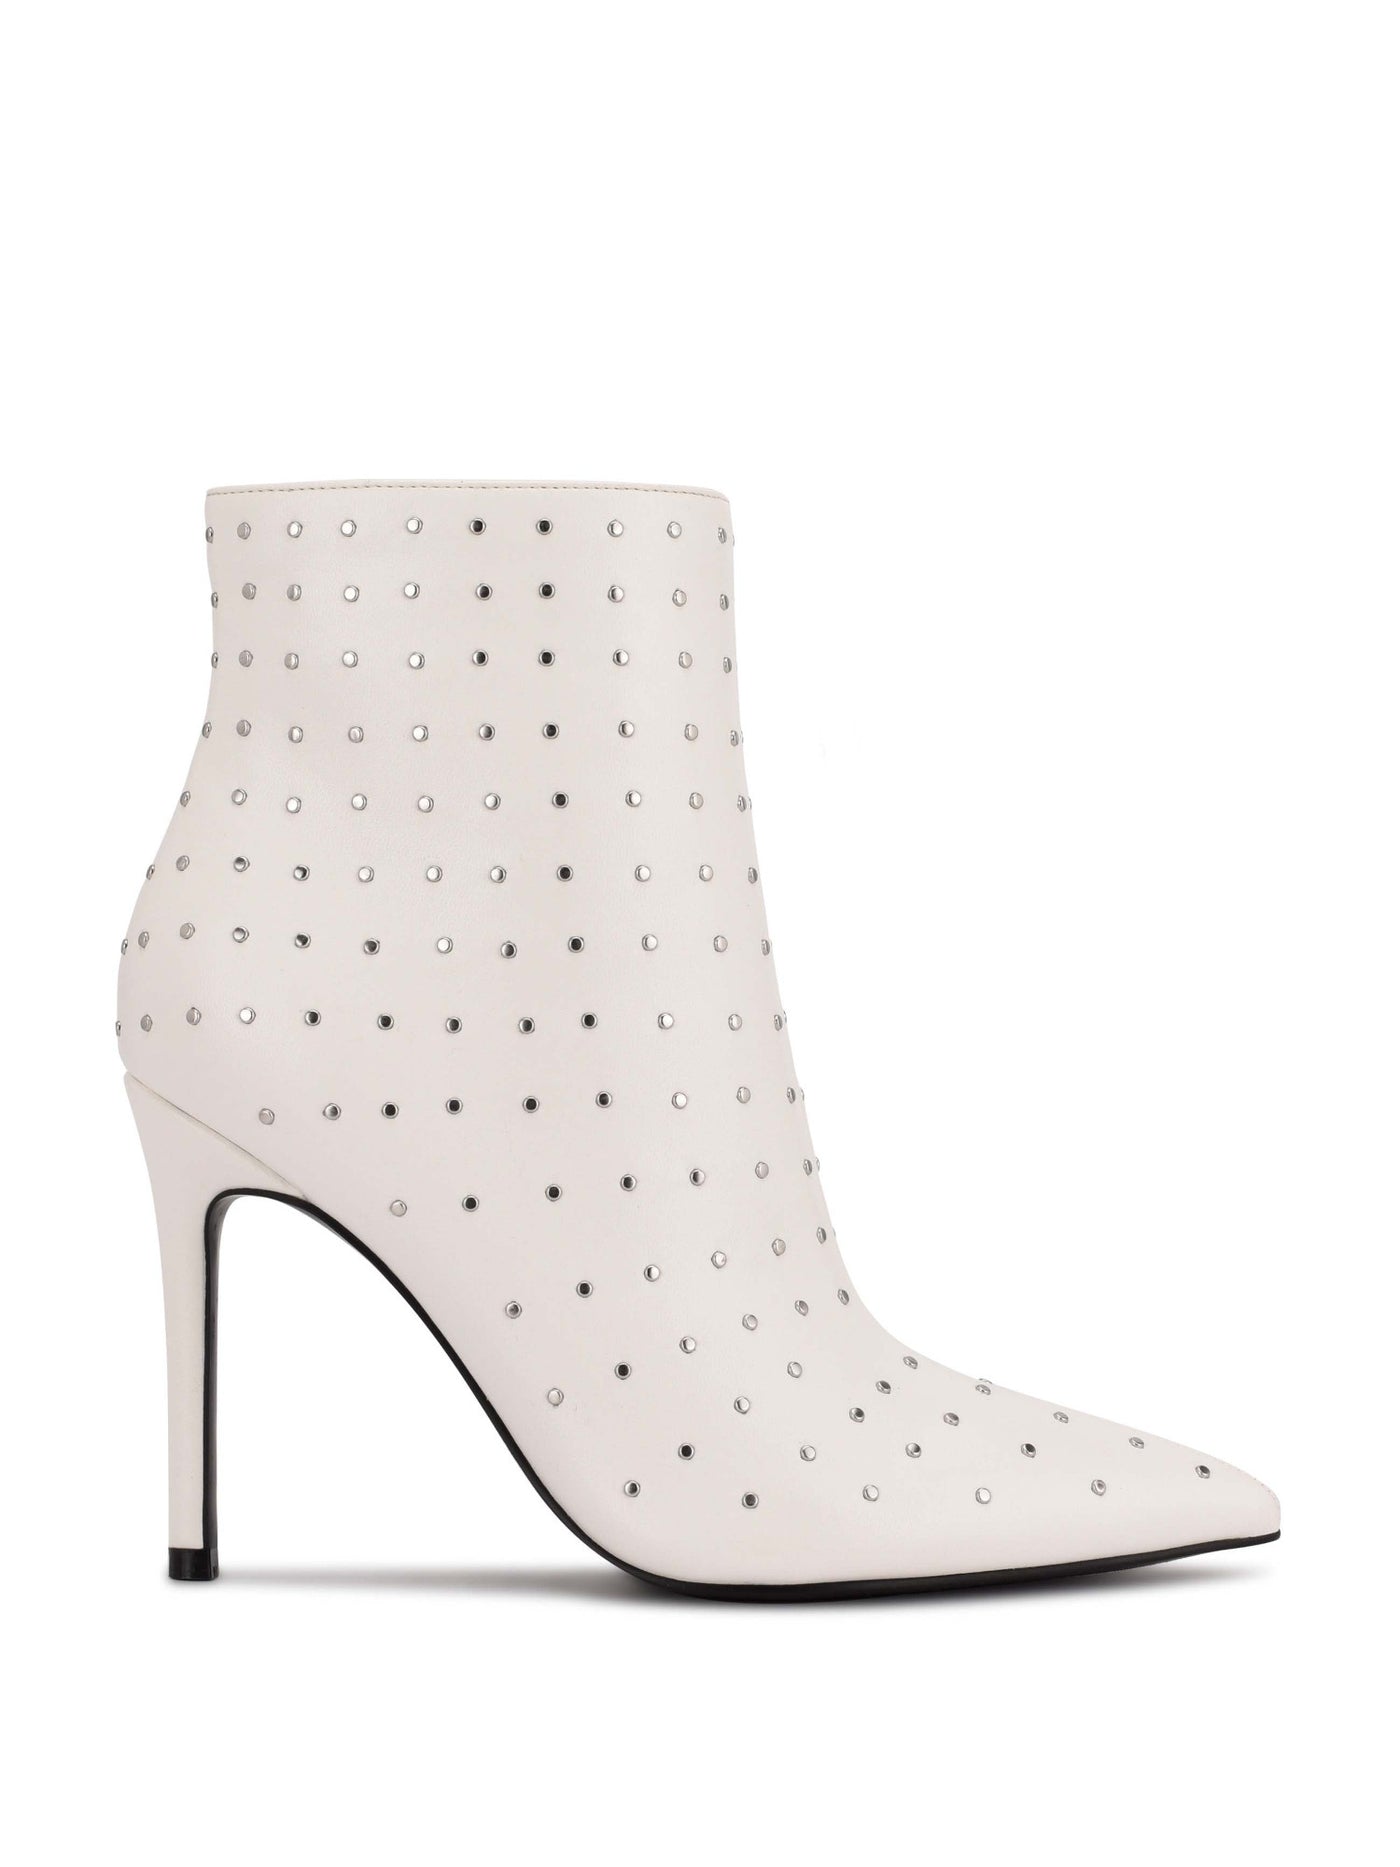 NINE WEST Womens White Studded Padded Farrah Pointy Toe Stiletto Zip-Up Dress Booties 7 M